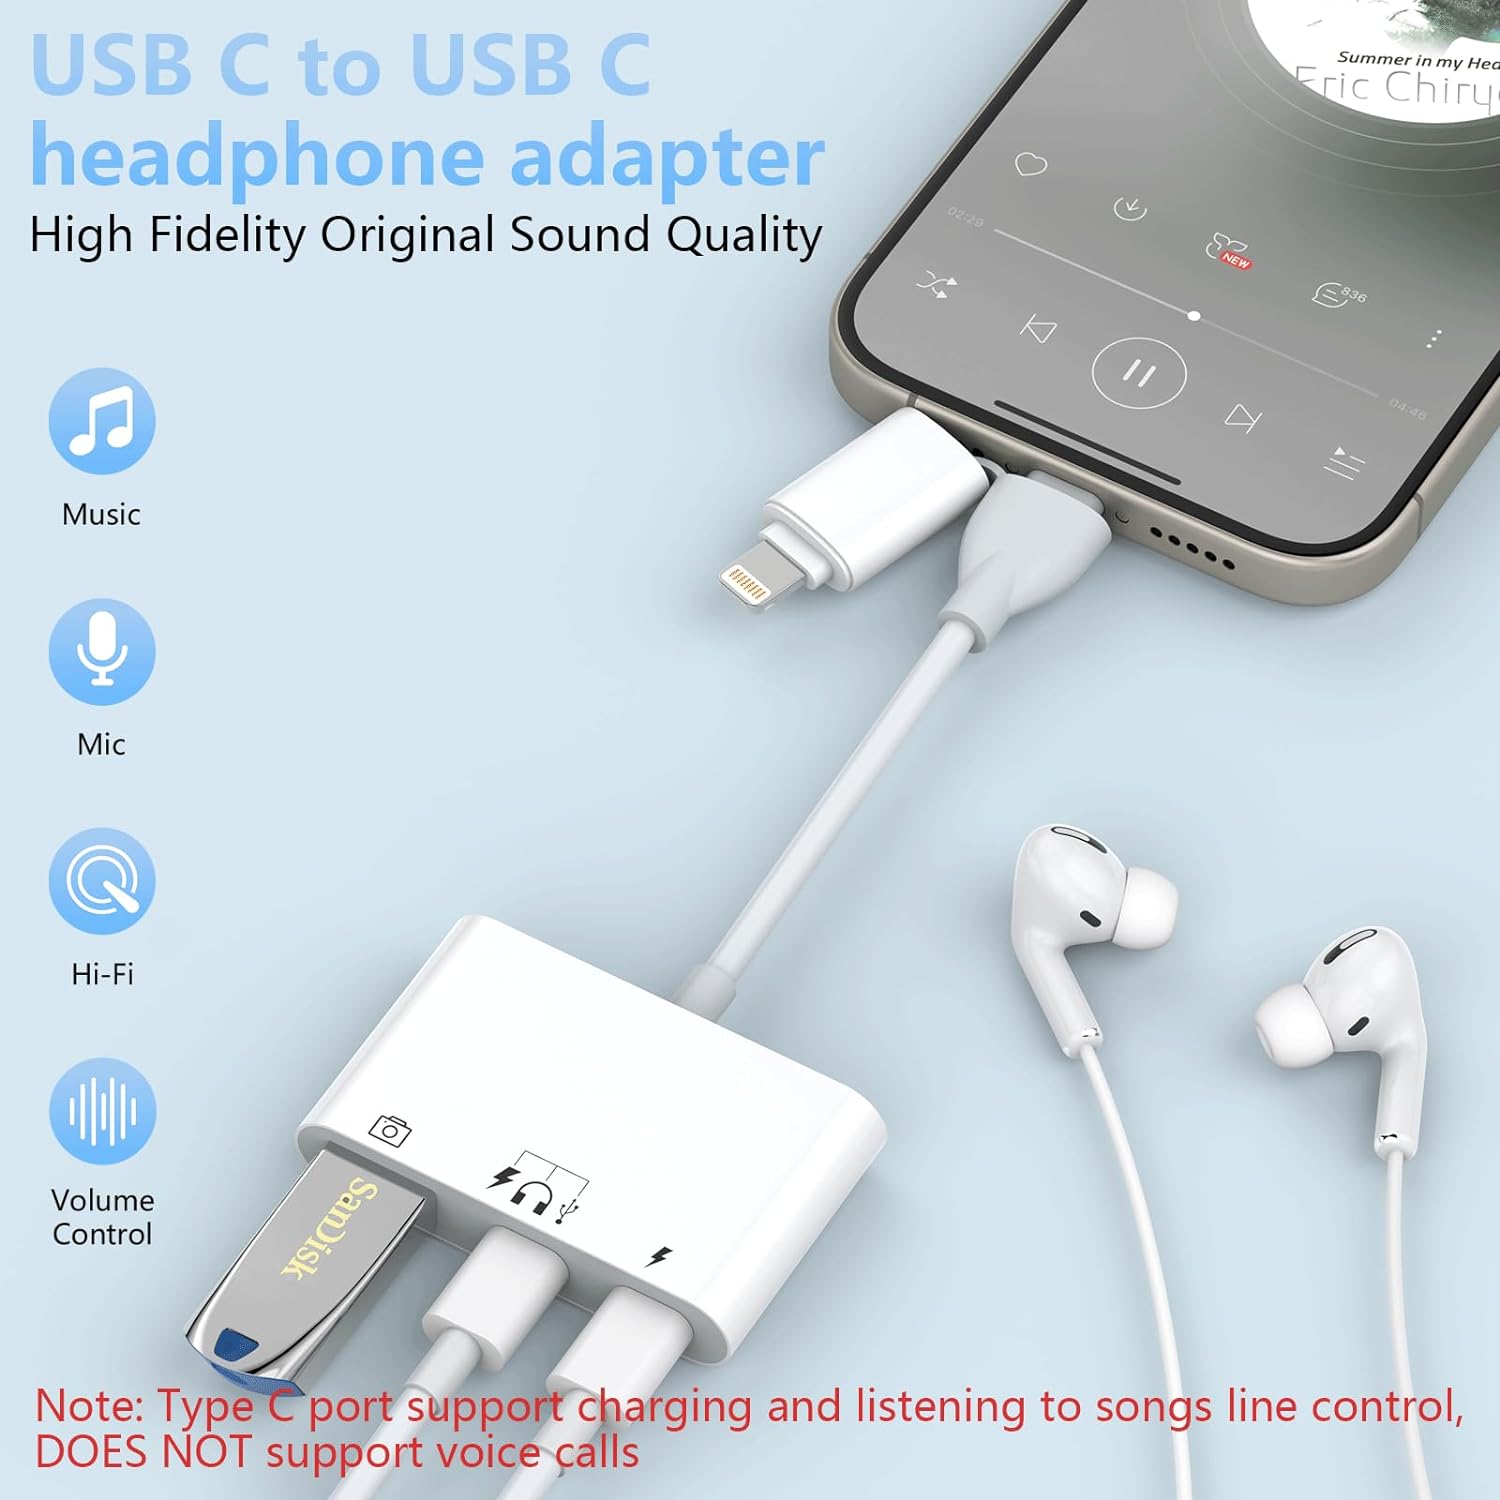 USB C Lightning to USB Camera Adapter for iPhone 15 Type C Audio Dongle Cable with PD60W Fast Charging Port for iPhone/iPad/Samsung/Laptops to Connect Card Reader USB Flash Drive U Disk Keyboard Mouse